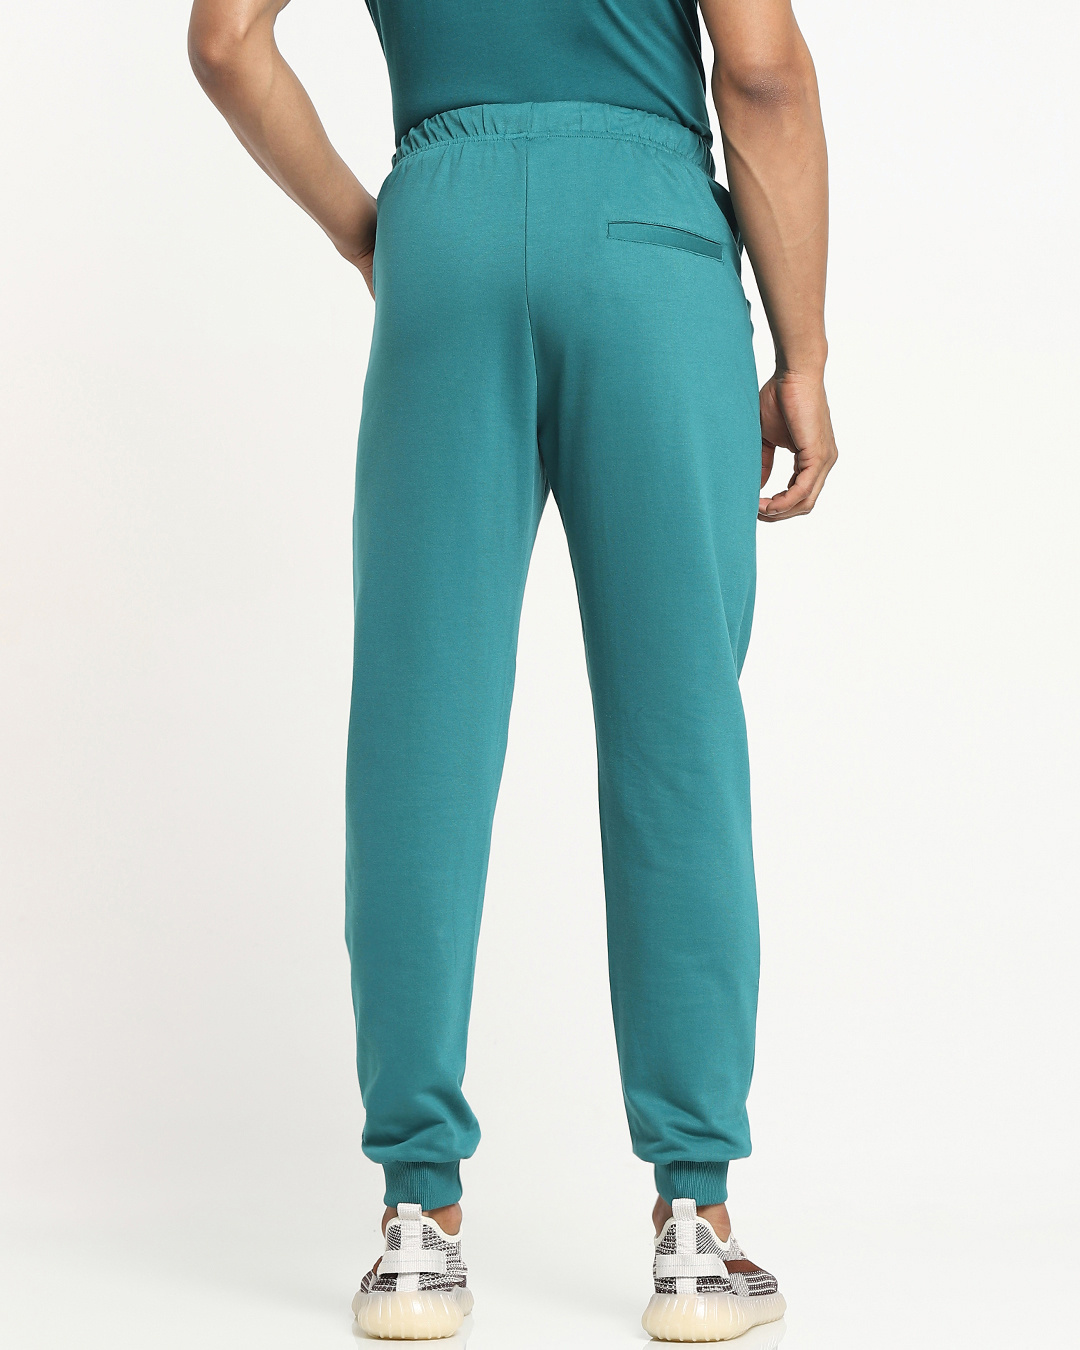 Shop Men's Snazzy Green Joggers-Back